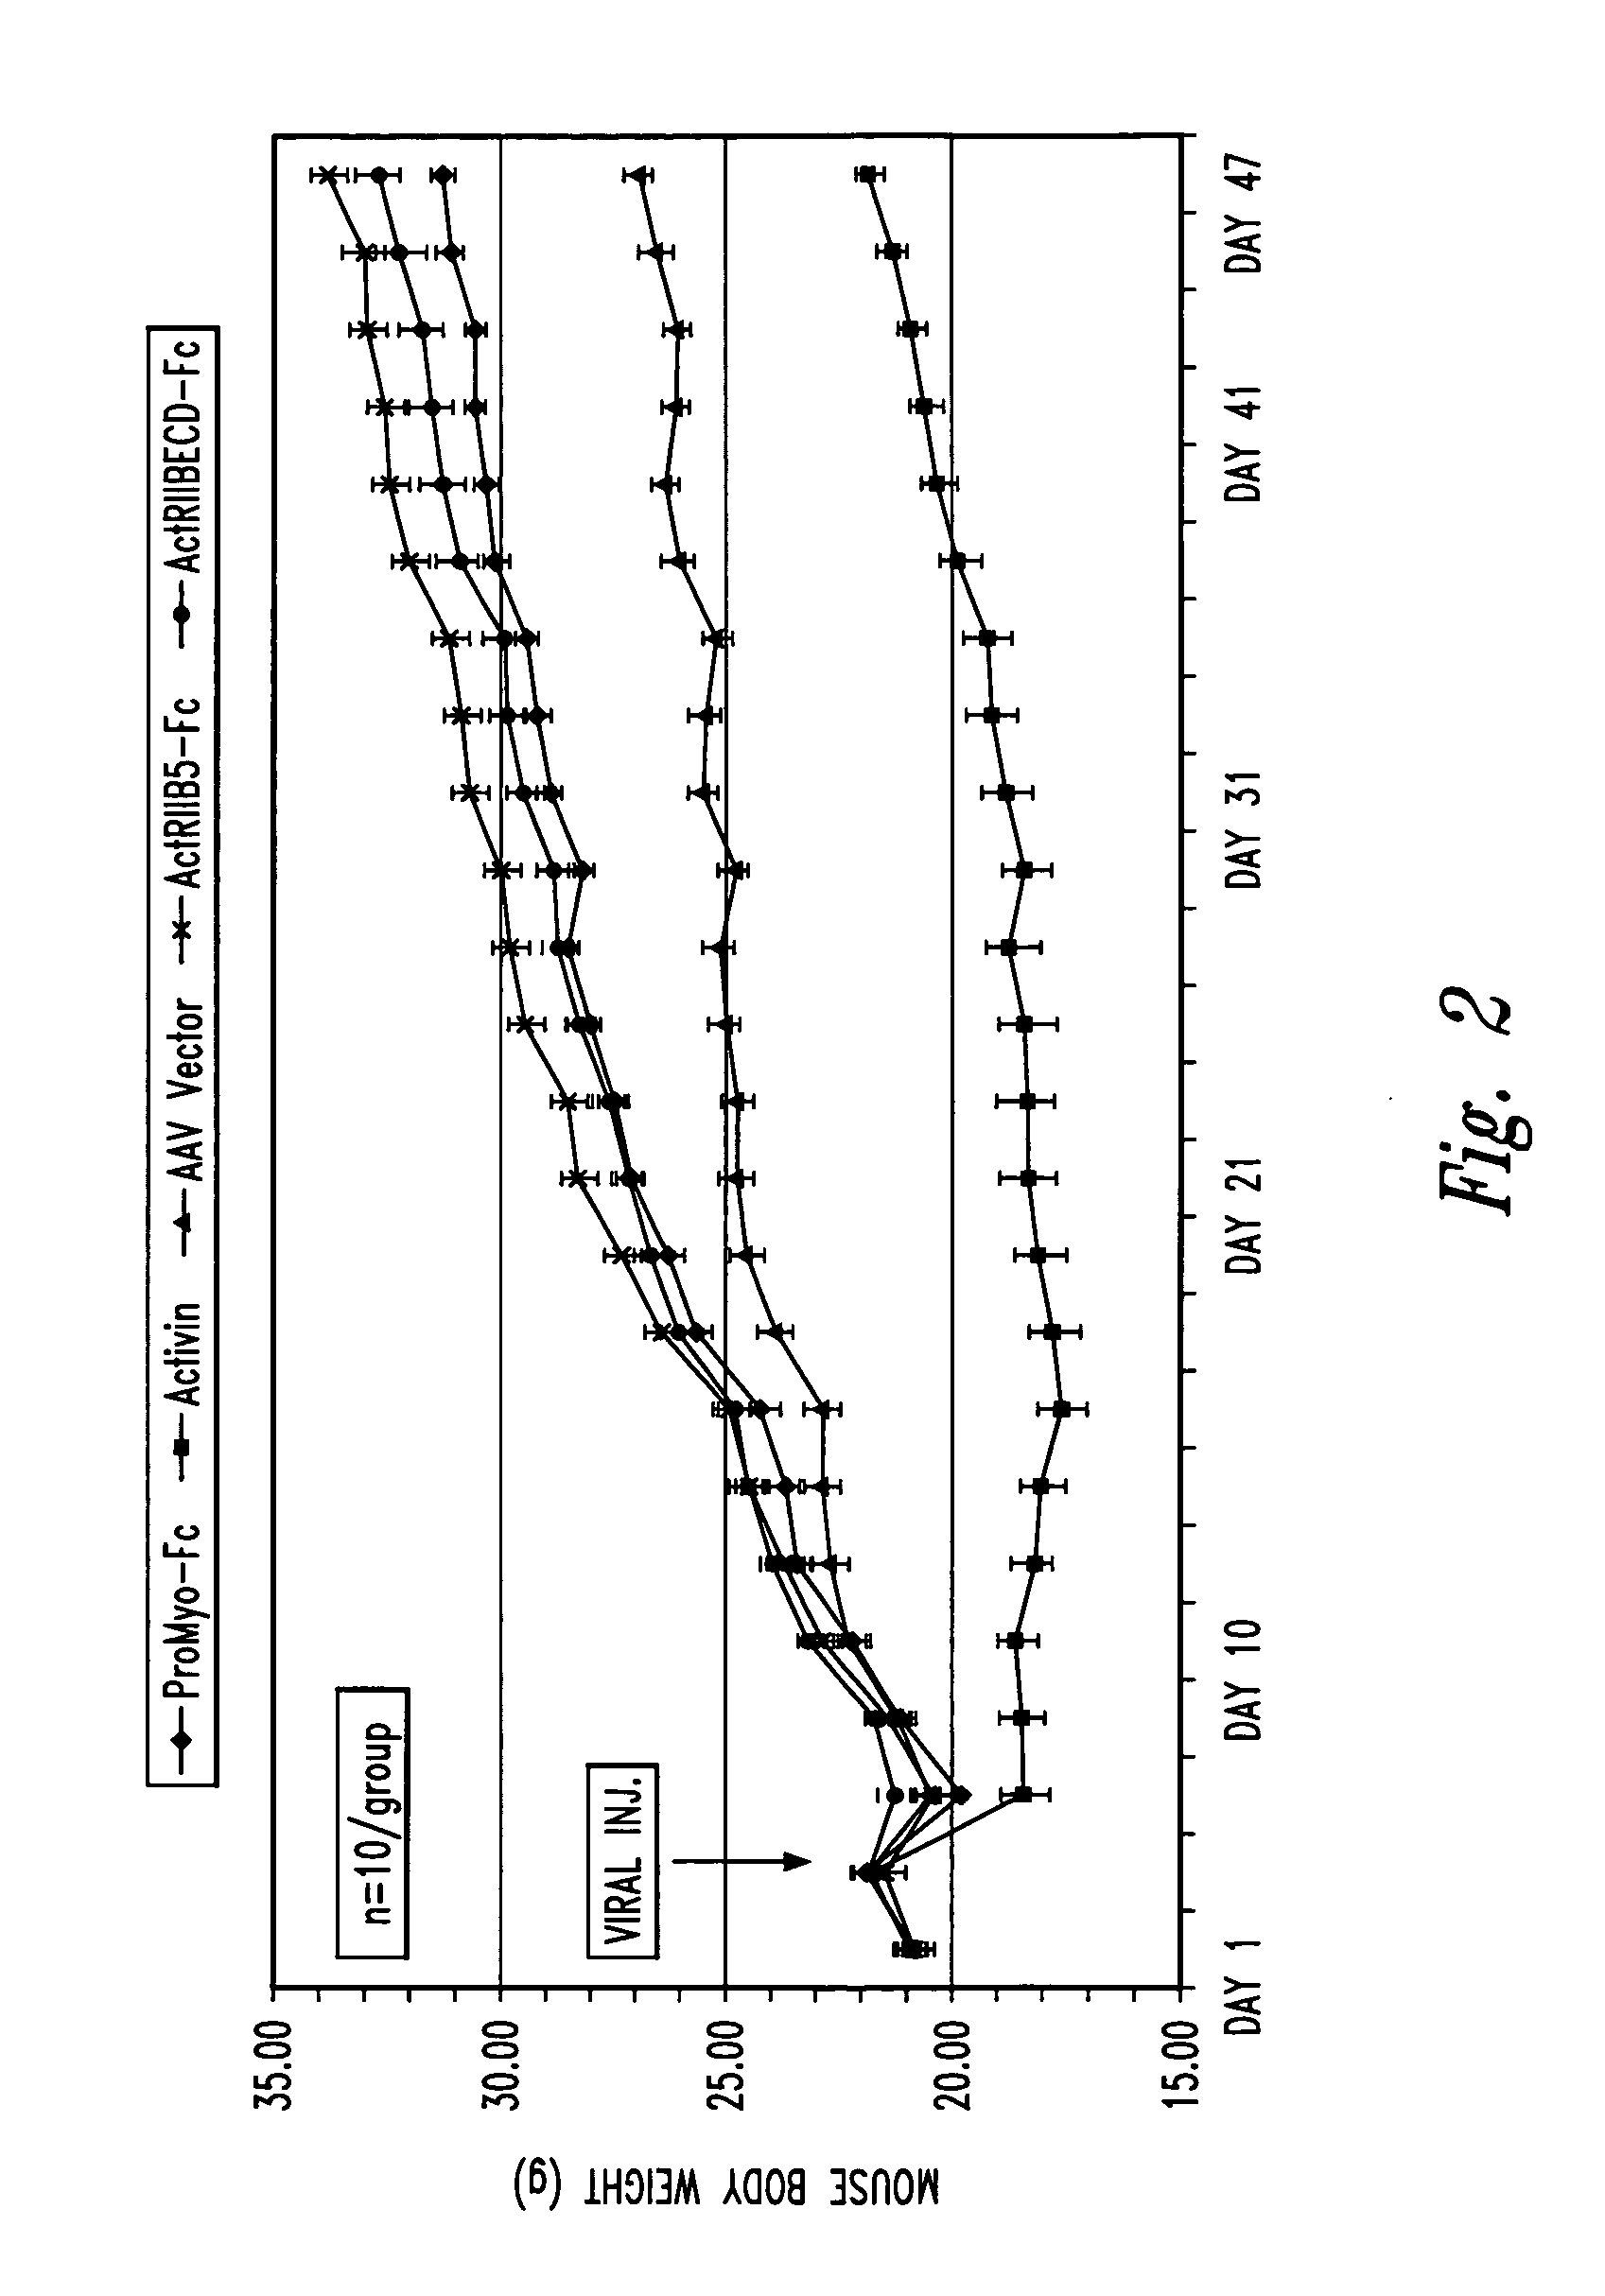 Novel activin receptor and uses thereof